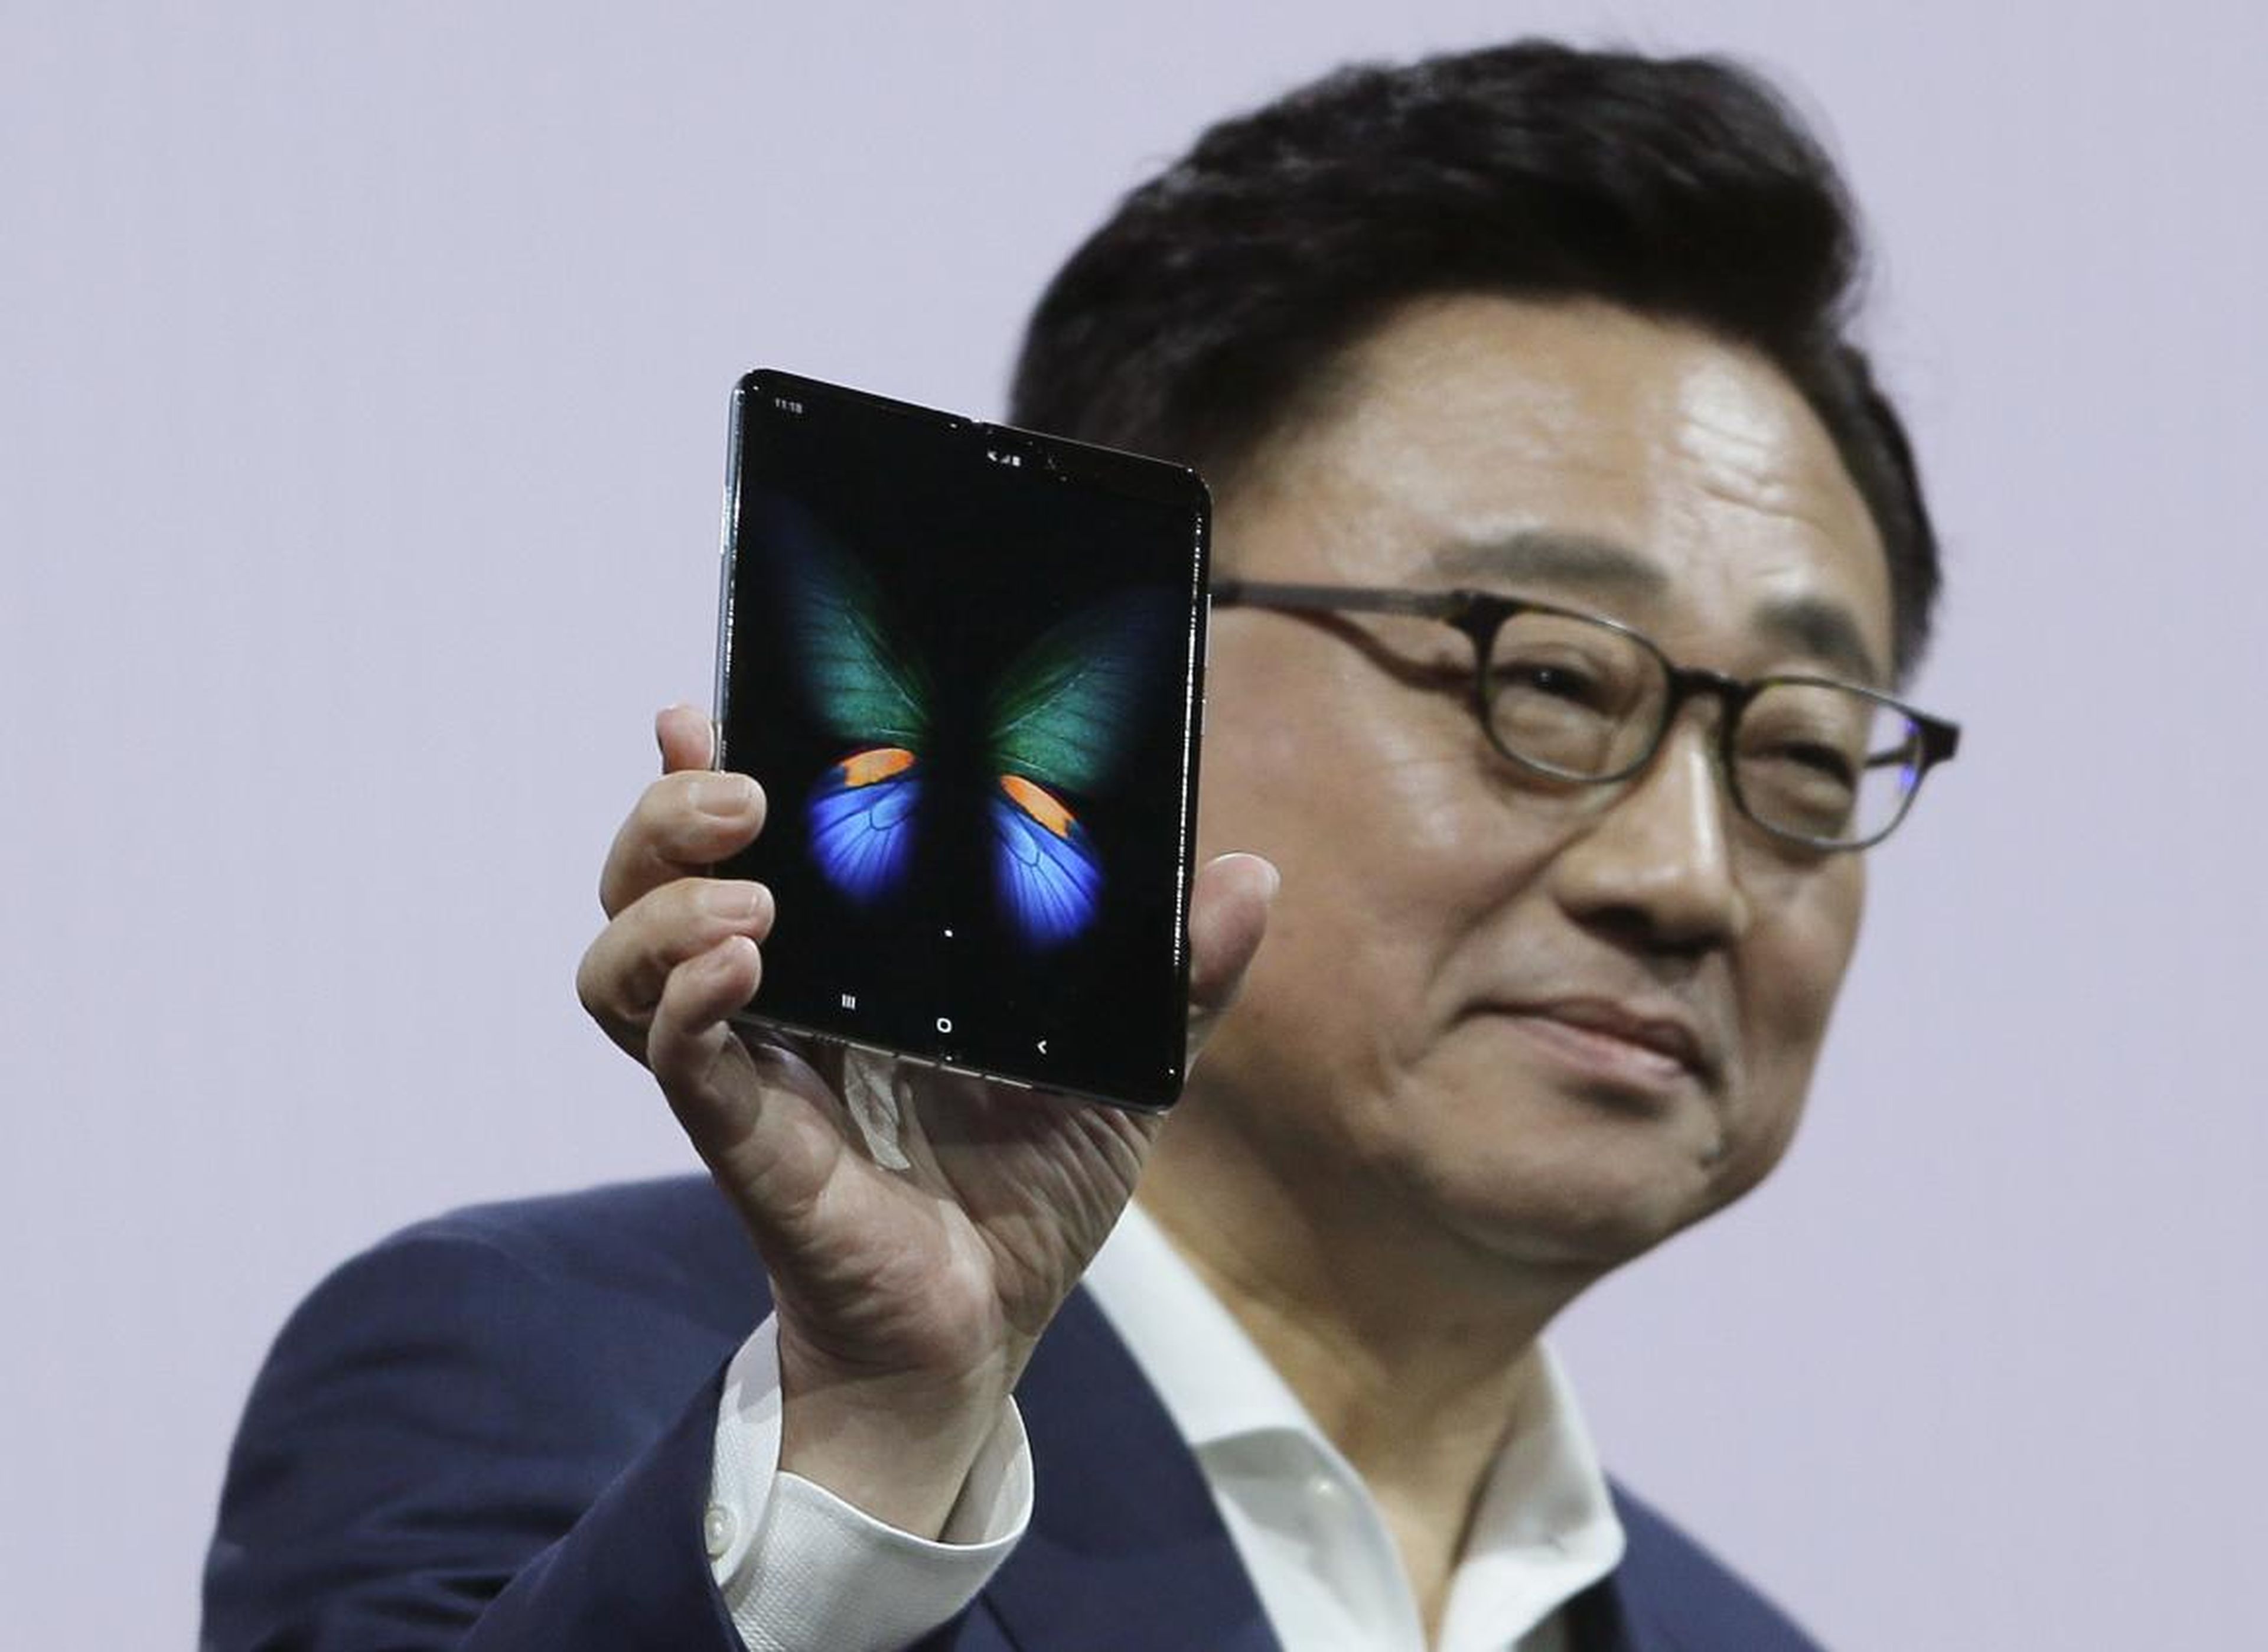 DJ Koh, the president and CEO of IT and mobile communications at Samsung, holding up the new Galaxy Fold smartphone during Samsung's Unpacked event.